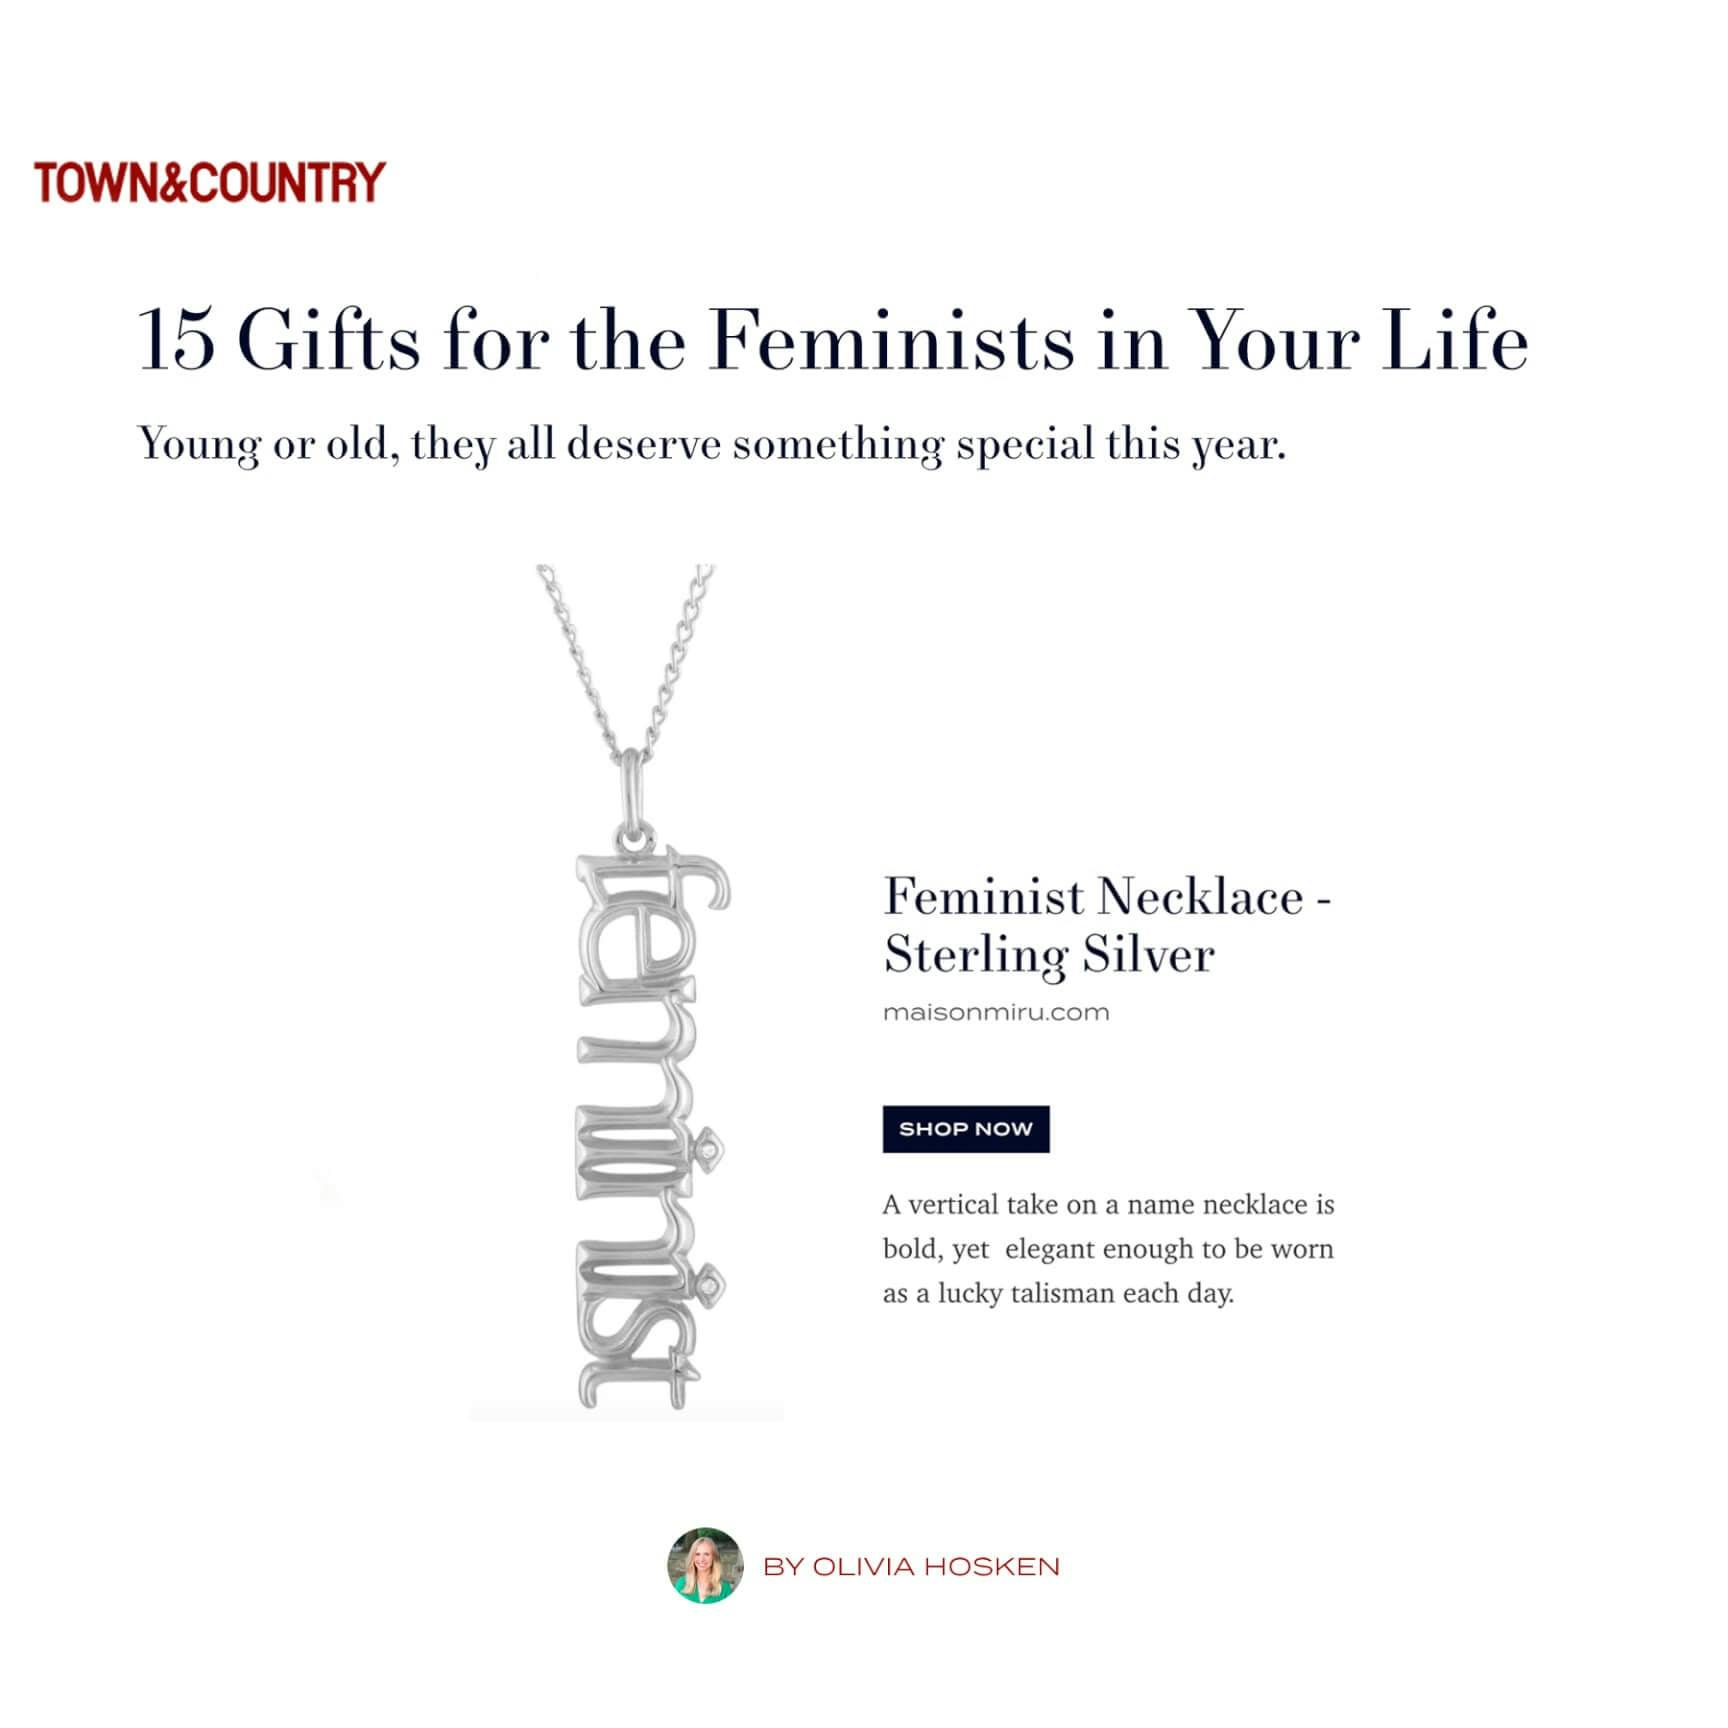 Our Feminist Necklace as seen on Town & Country